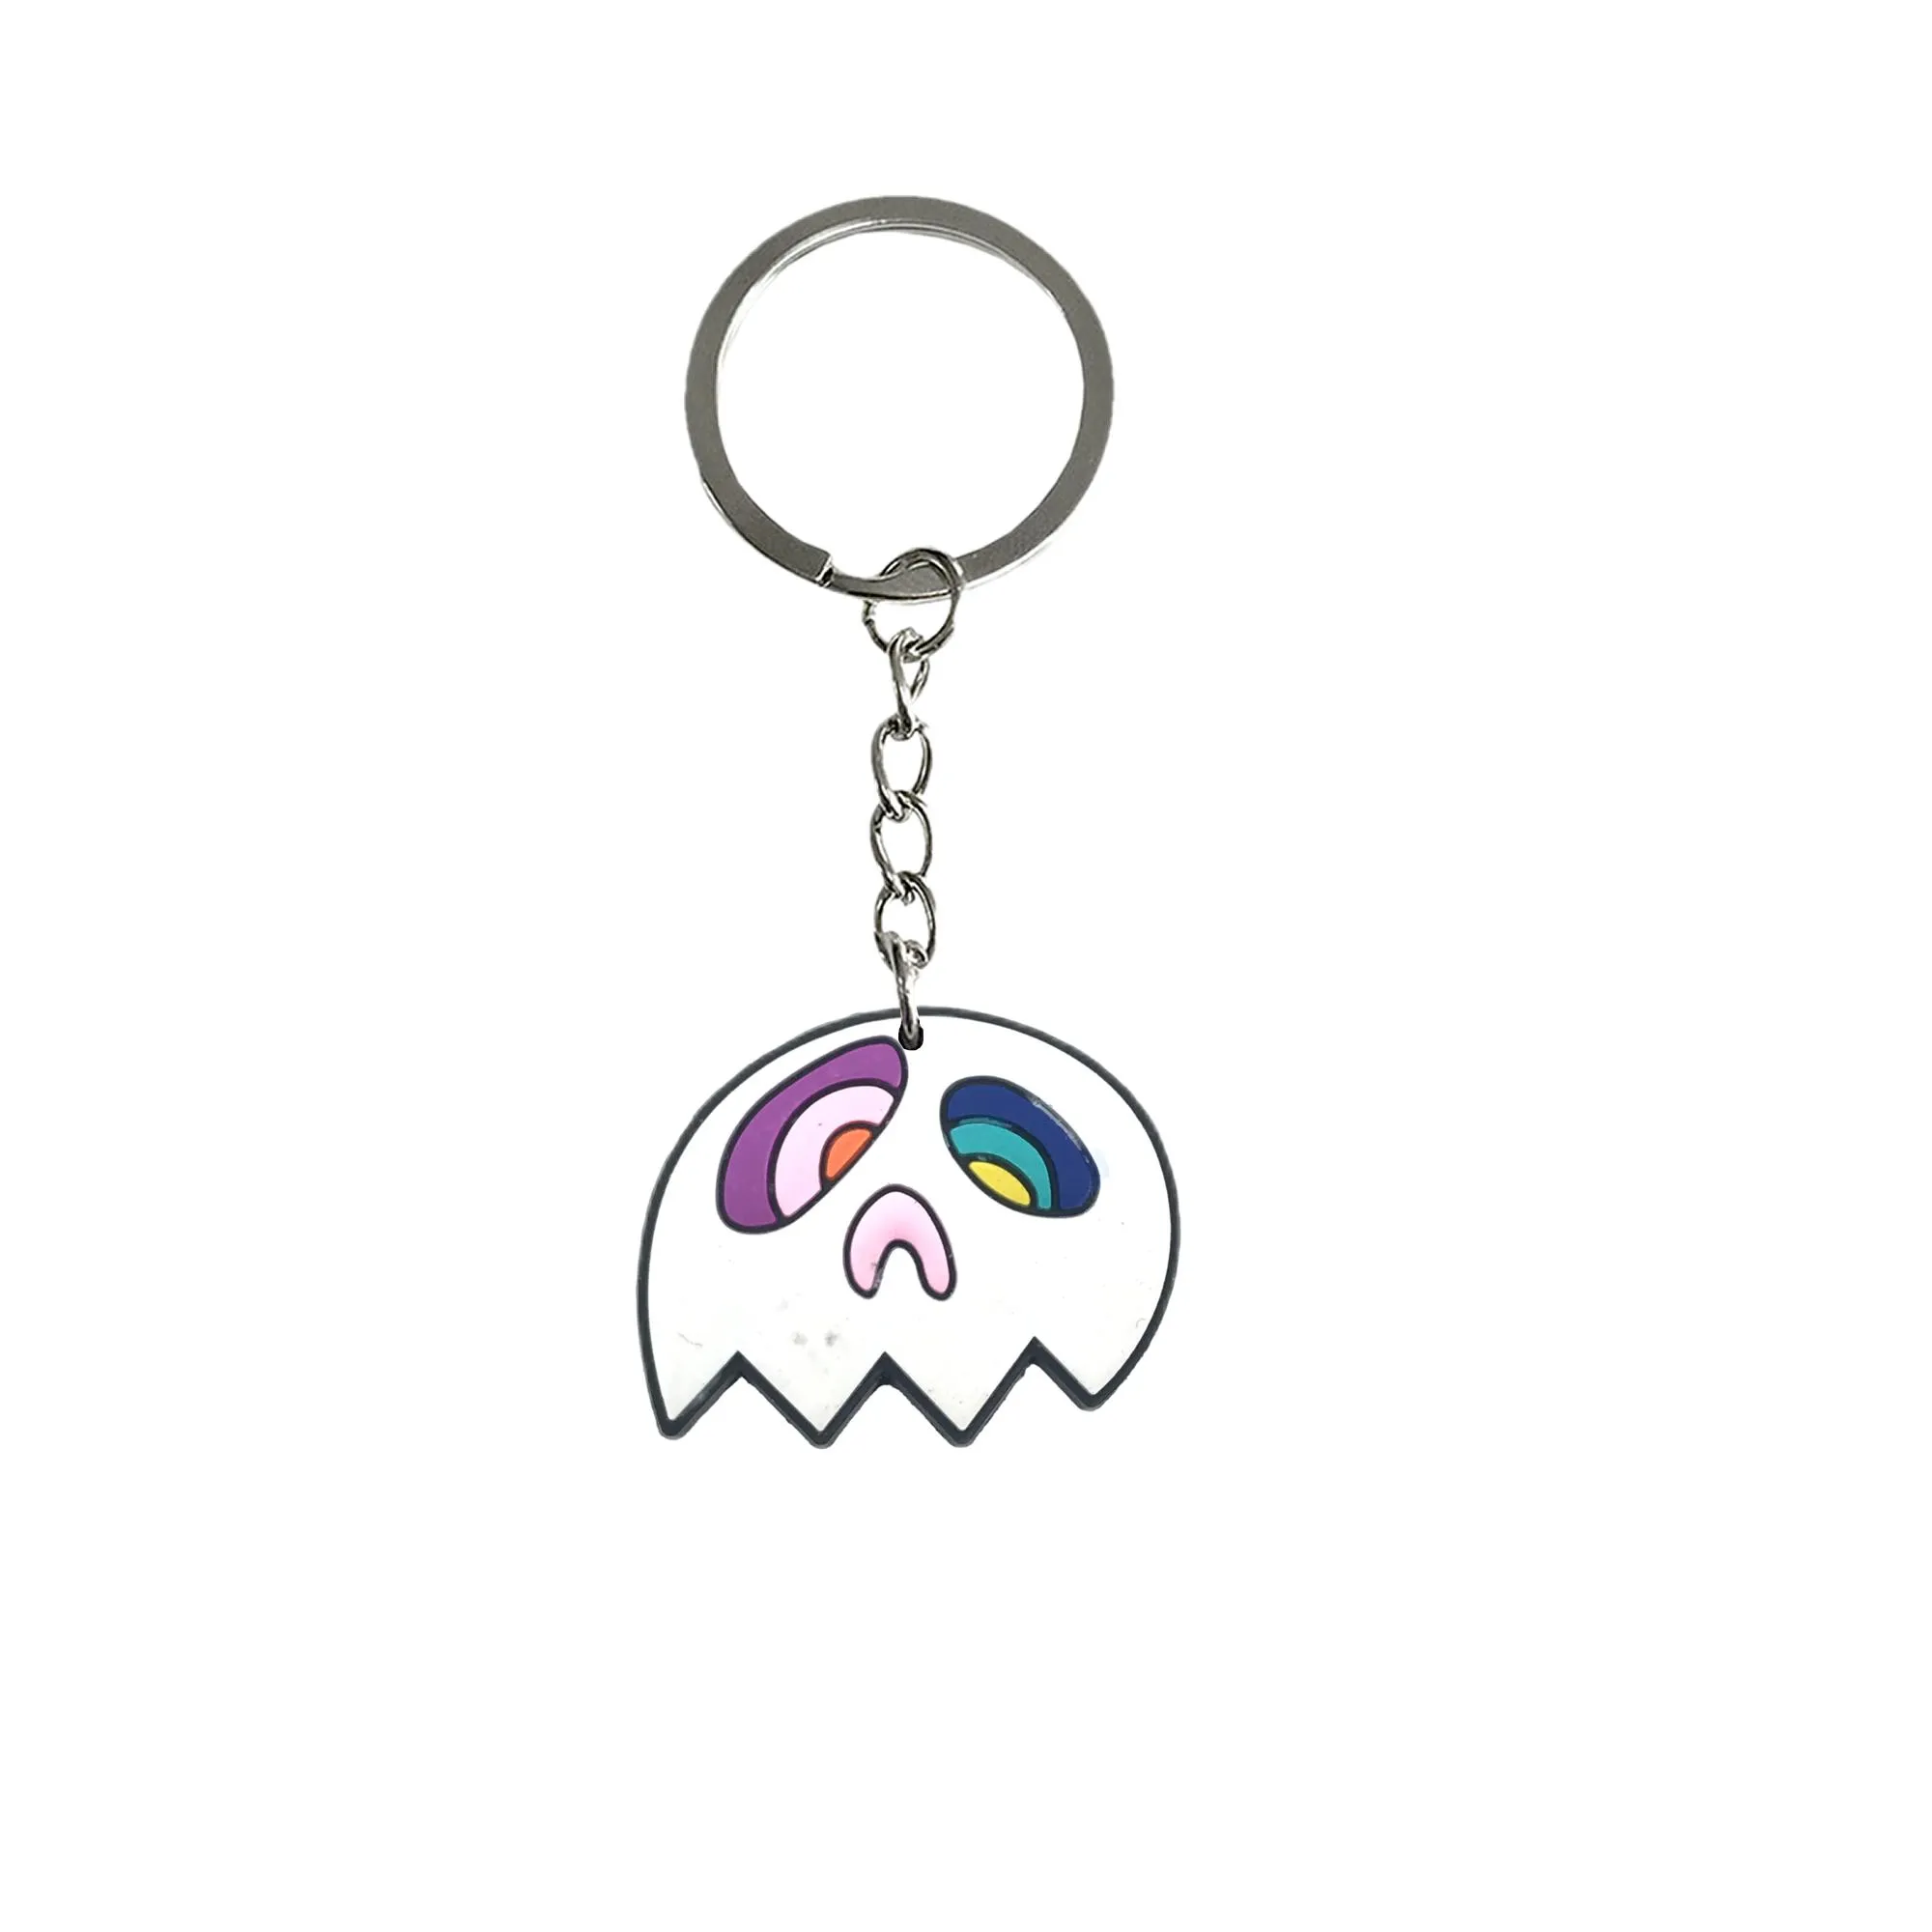 rainbow flower keychain key rings chain for girls keychains keyring suitable schoolbag backpack car charms school bags women